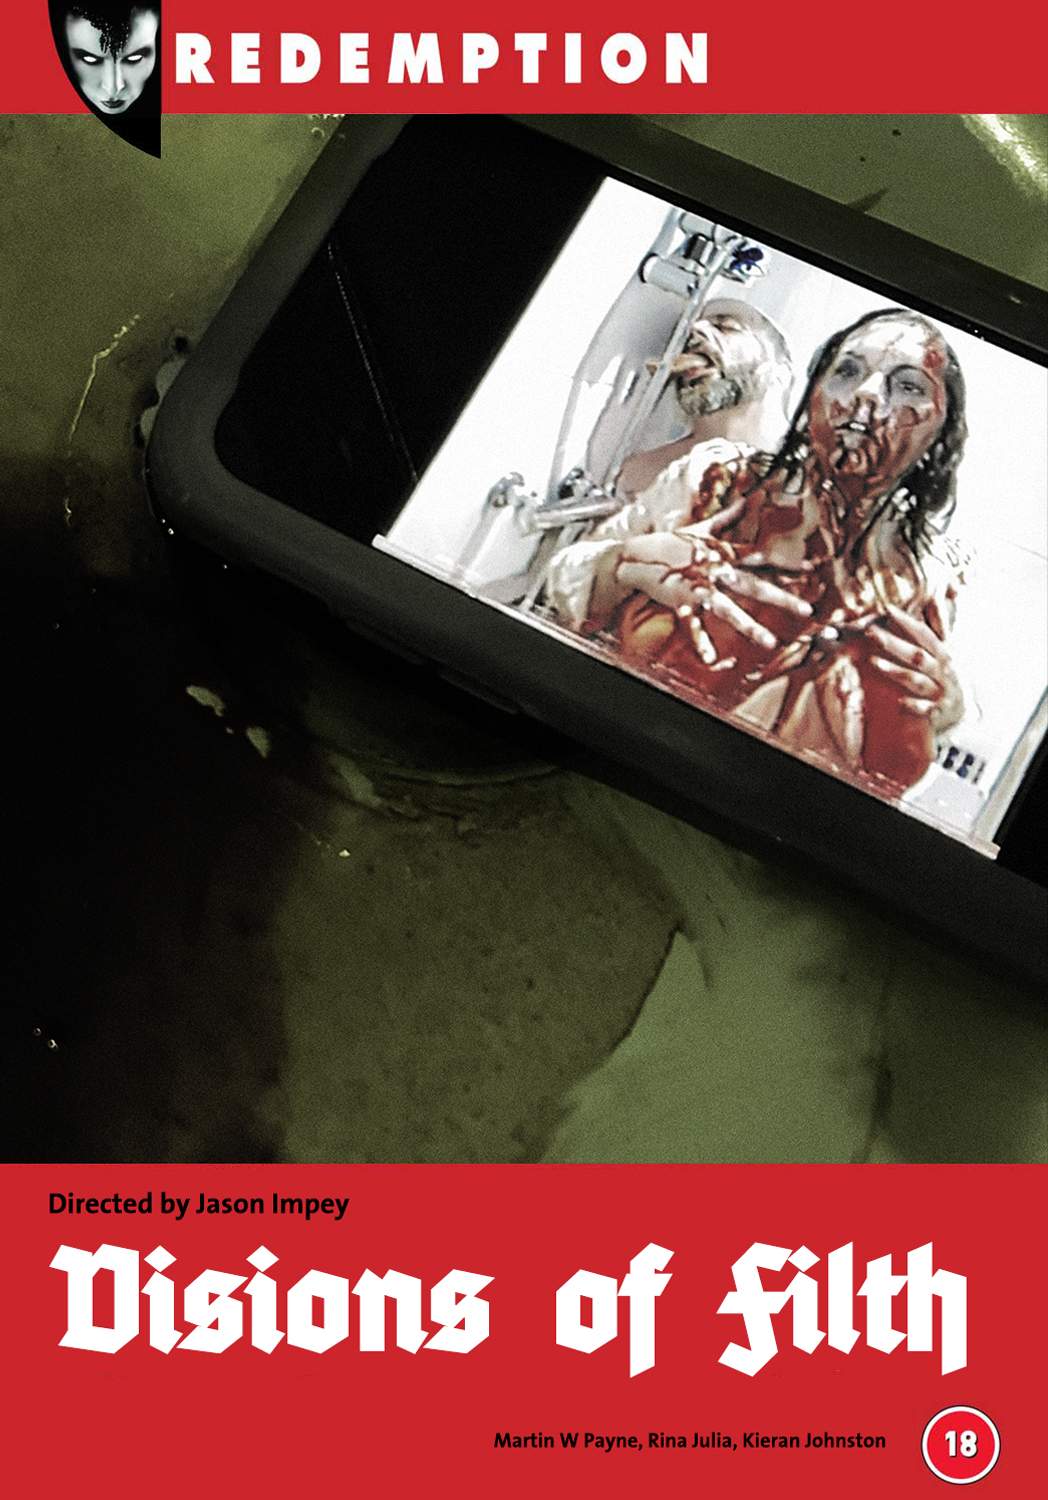 Watch Jason Impey's ultra extreme Visions of Filth!